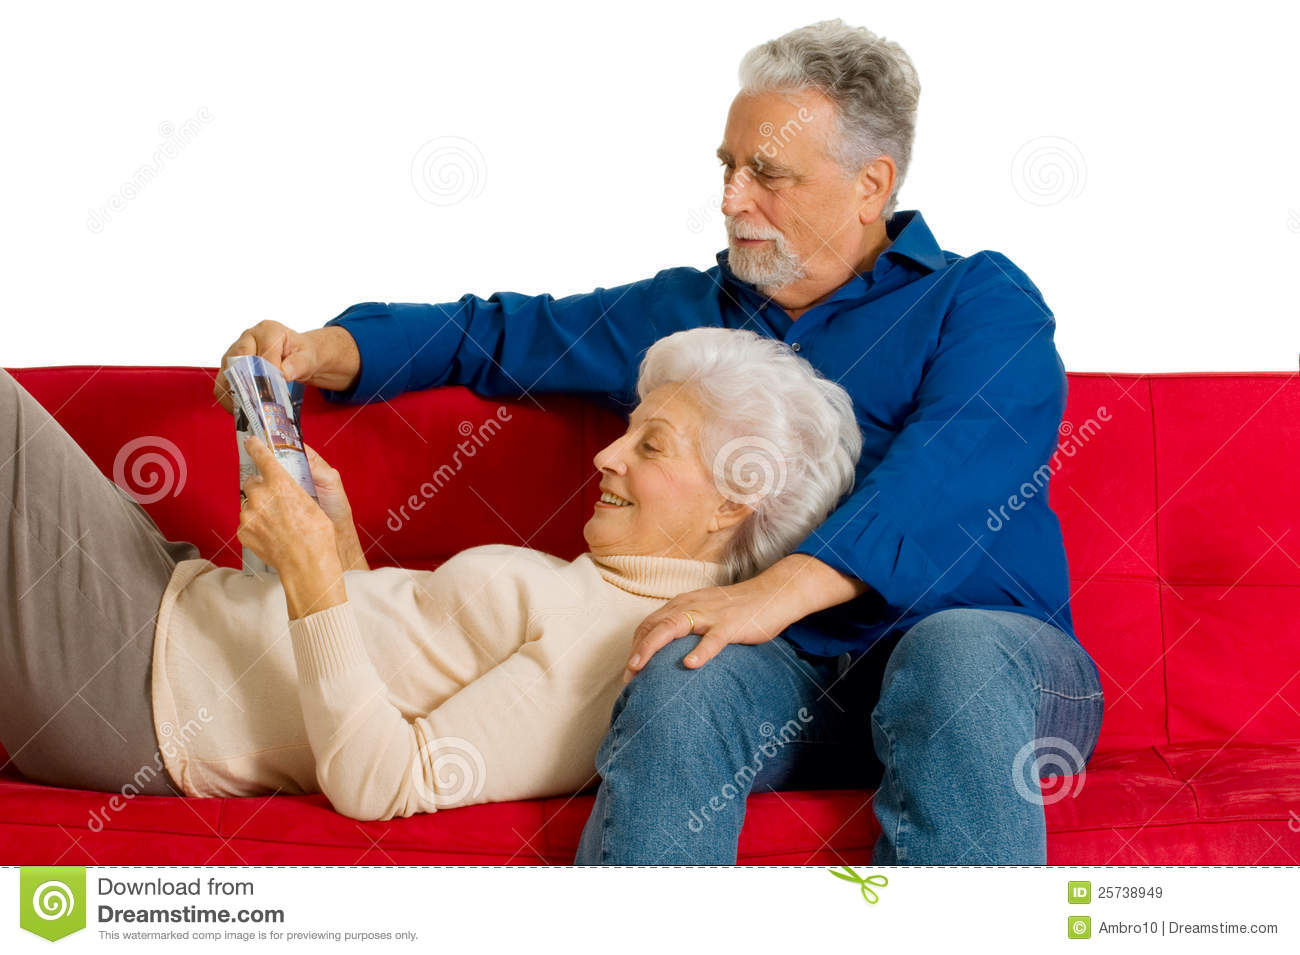 Elderly Couple On The Couch Royalty Free Stock Images   Image